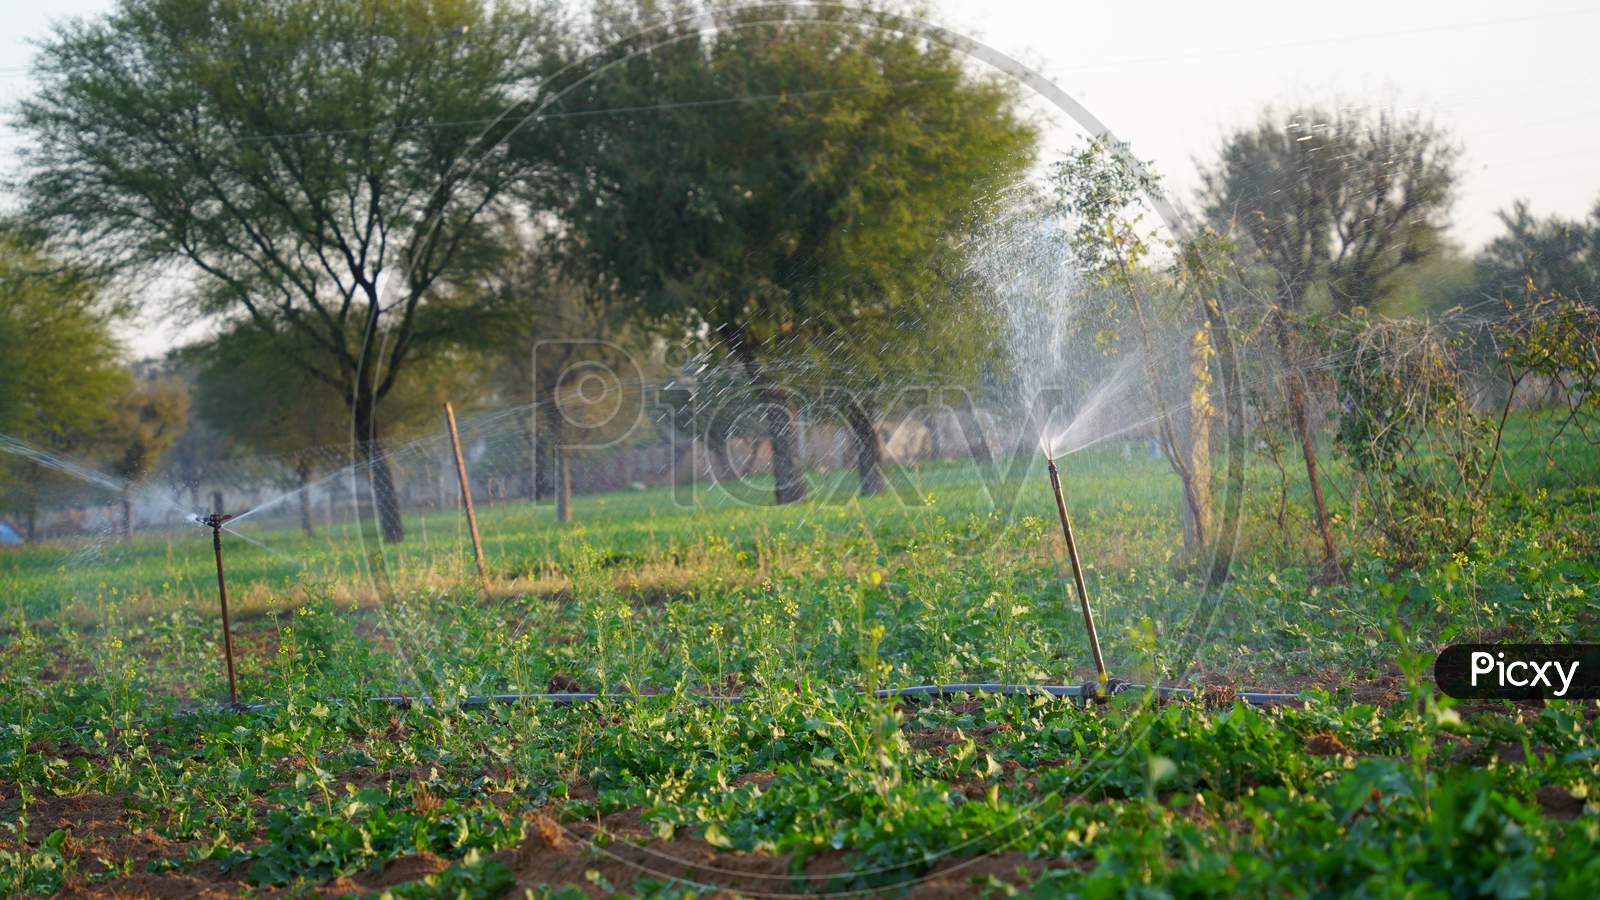 Winter Season, Foggy Morning Beautiful Garden Sprinkler Super Slow Motion Shot. Beautiful Splashes Of Water Scattering By Automatic Water Sprinkler With Little Glowing Water Drops.